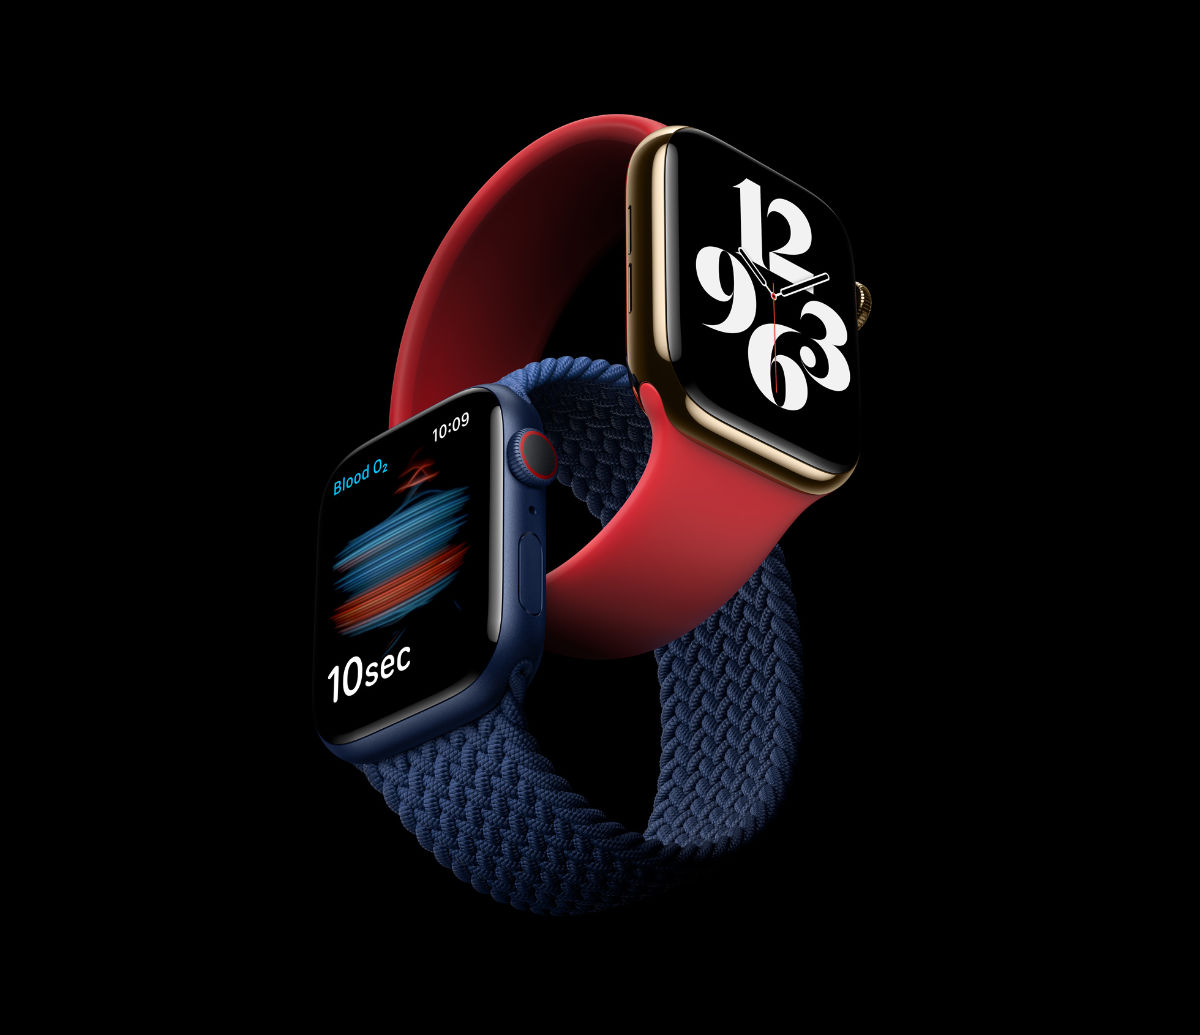 Apple Watch Series 6 and Apple Watch SE